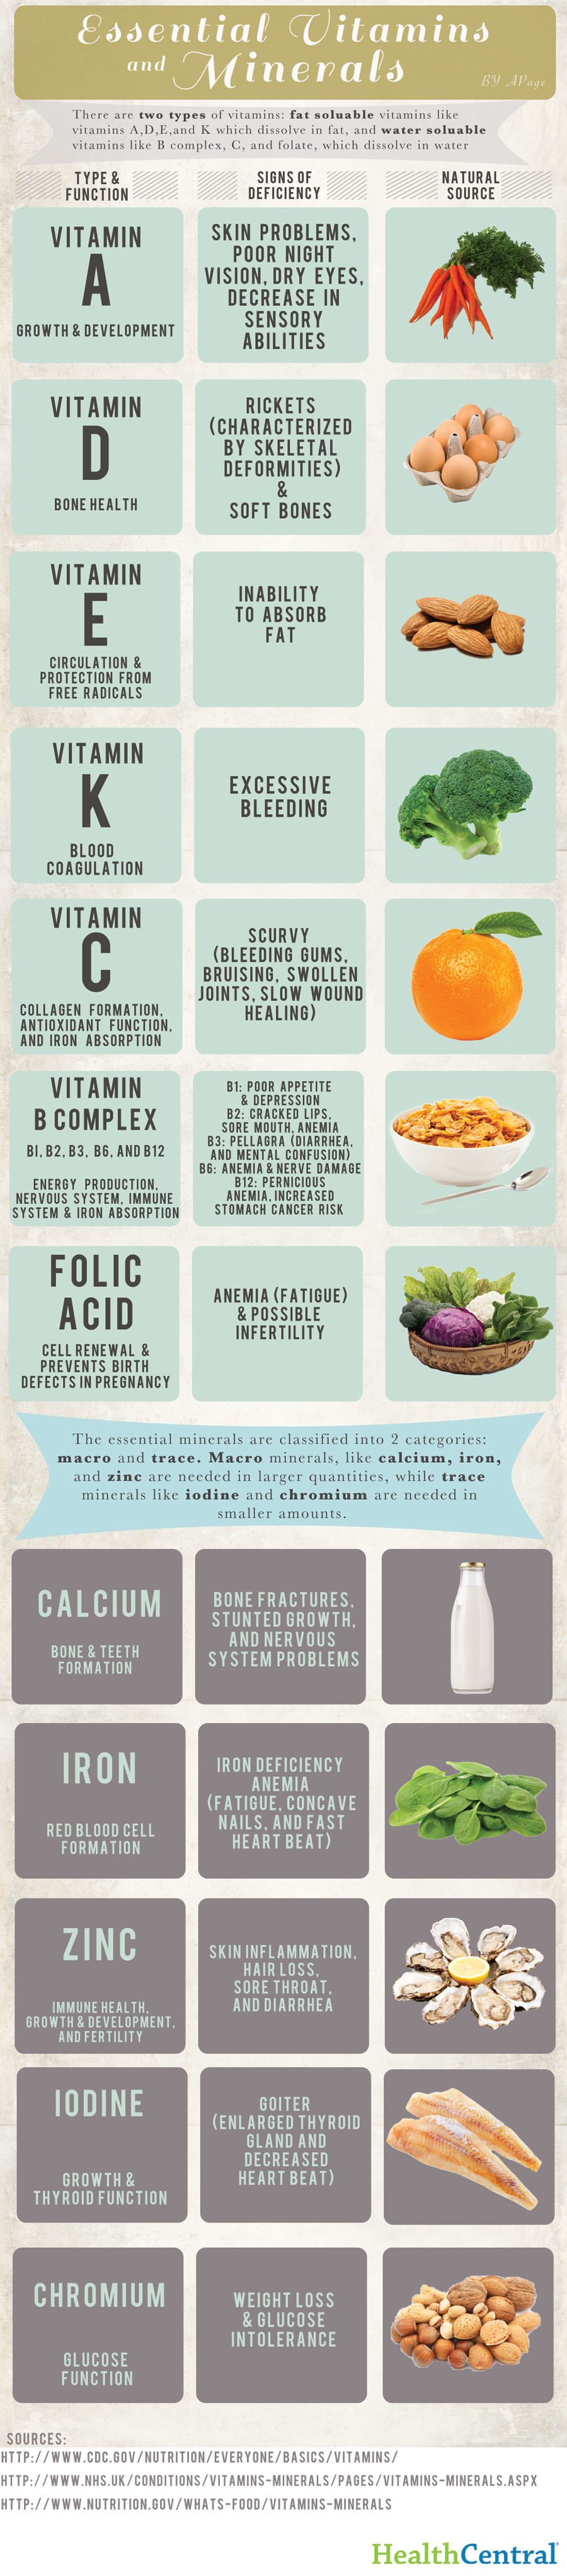 Essential Vitamins and Minerals Infographic